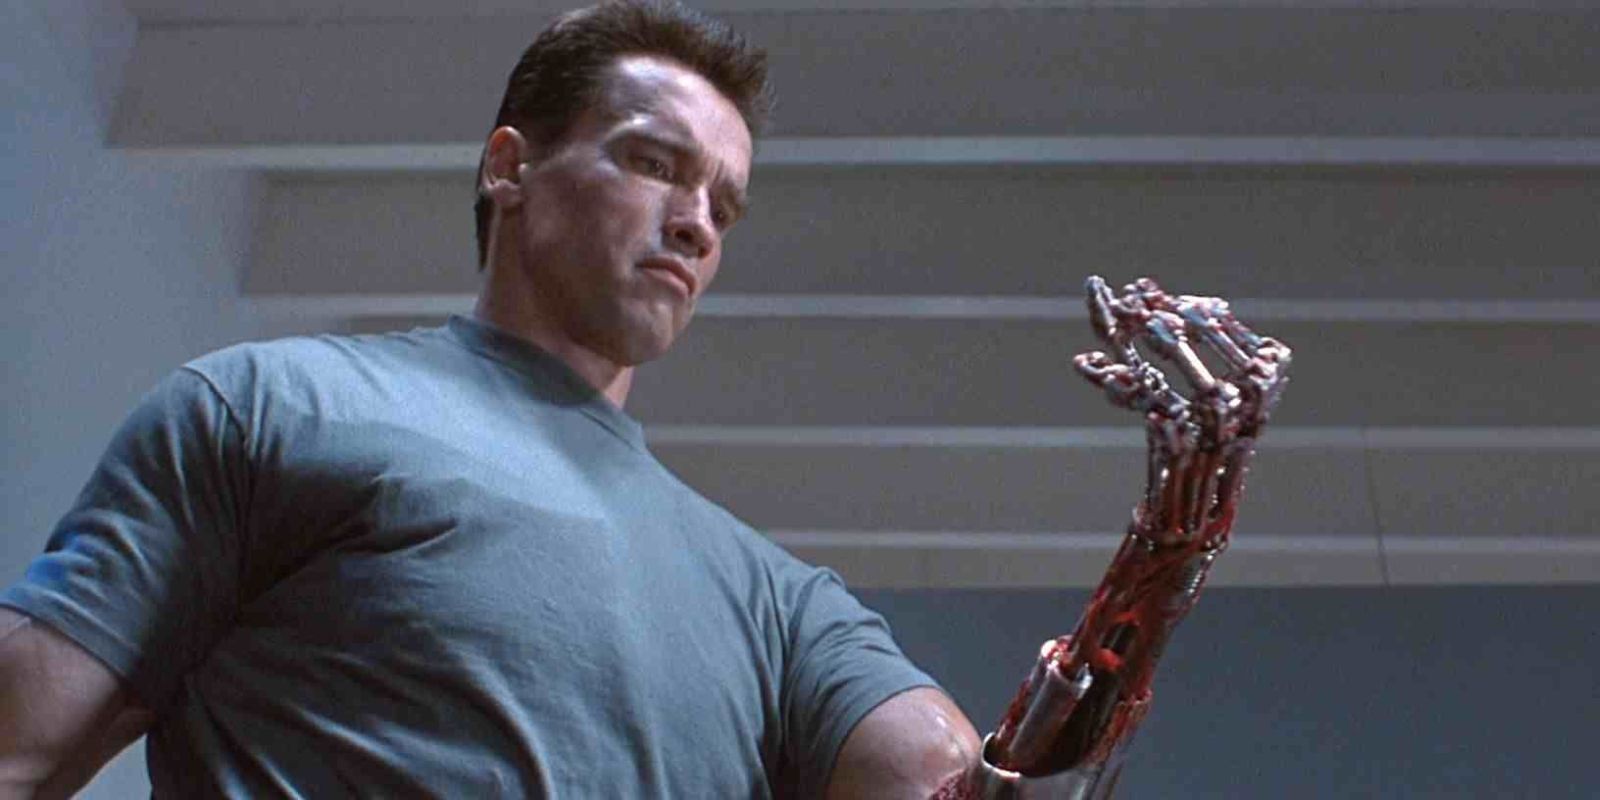 The T-800 looking at his robotic arm in Terminator 2: Judgement Day